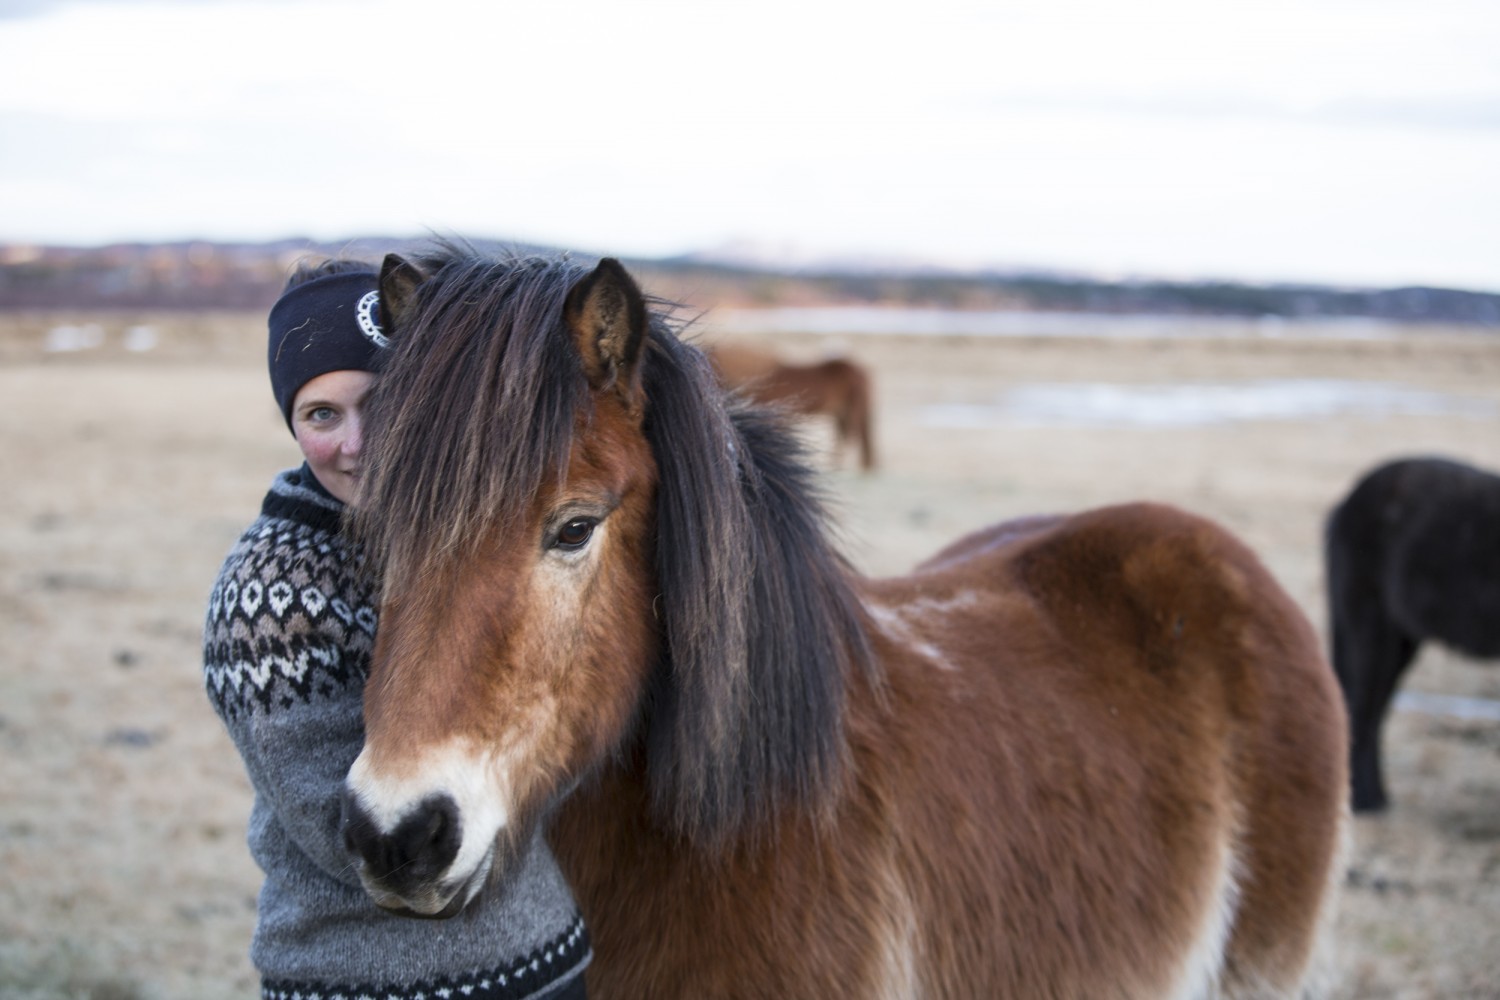 Meet the Icelandic horse, a unique breed that has been evolutionarily isolated for a millennium.